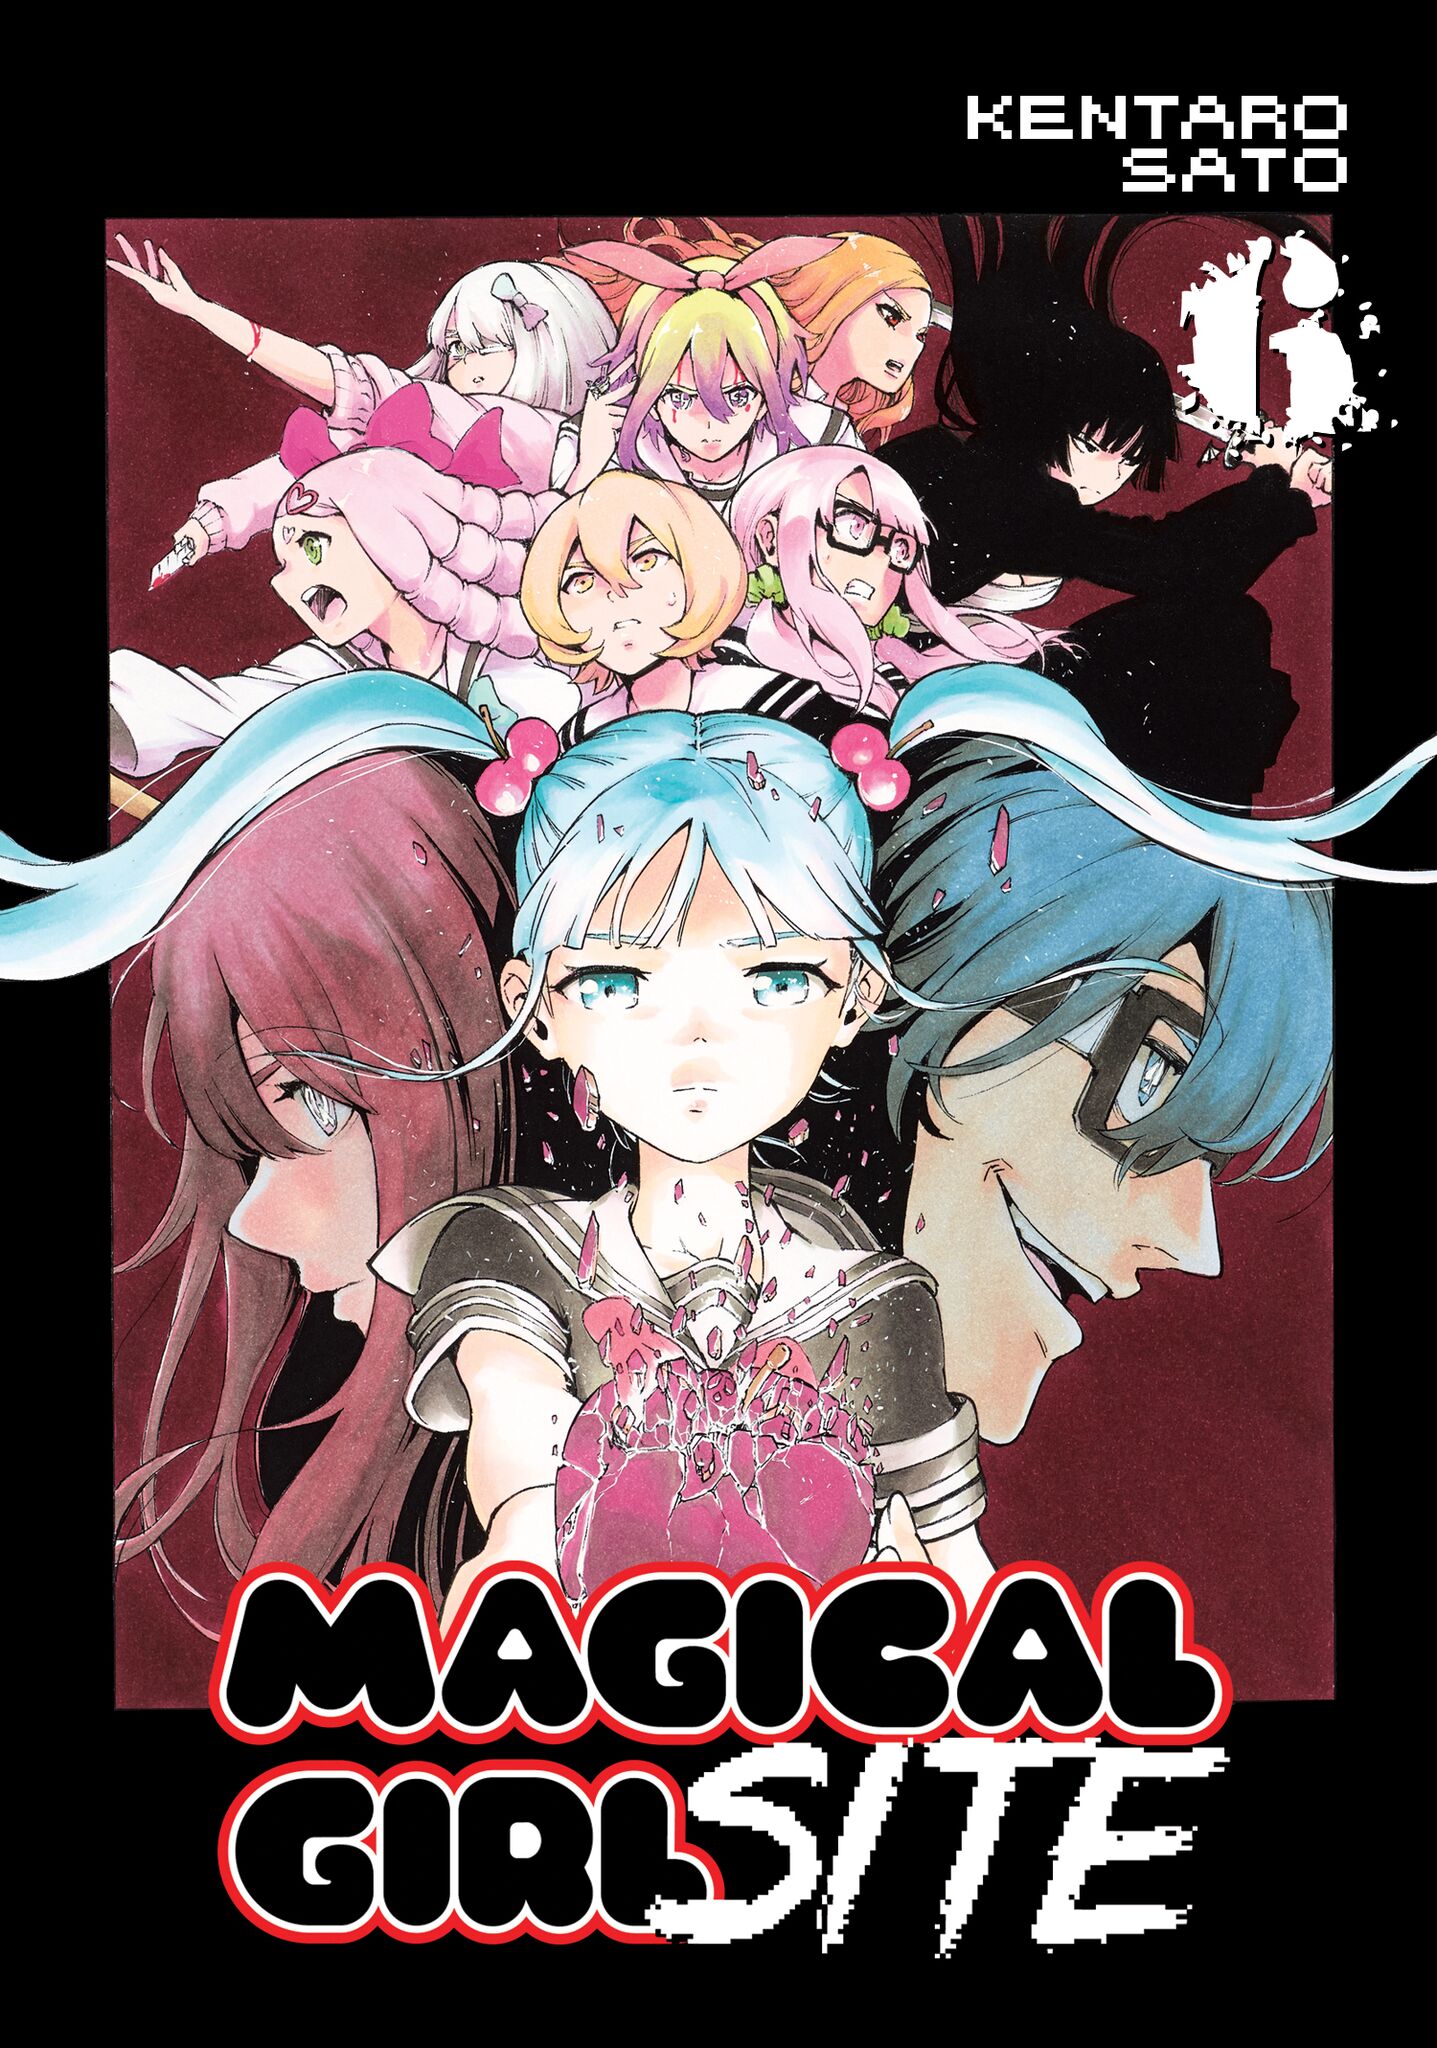 Magical Girl Site Complete Collection